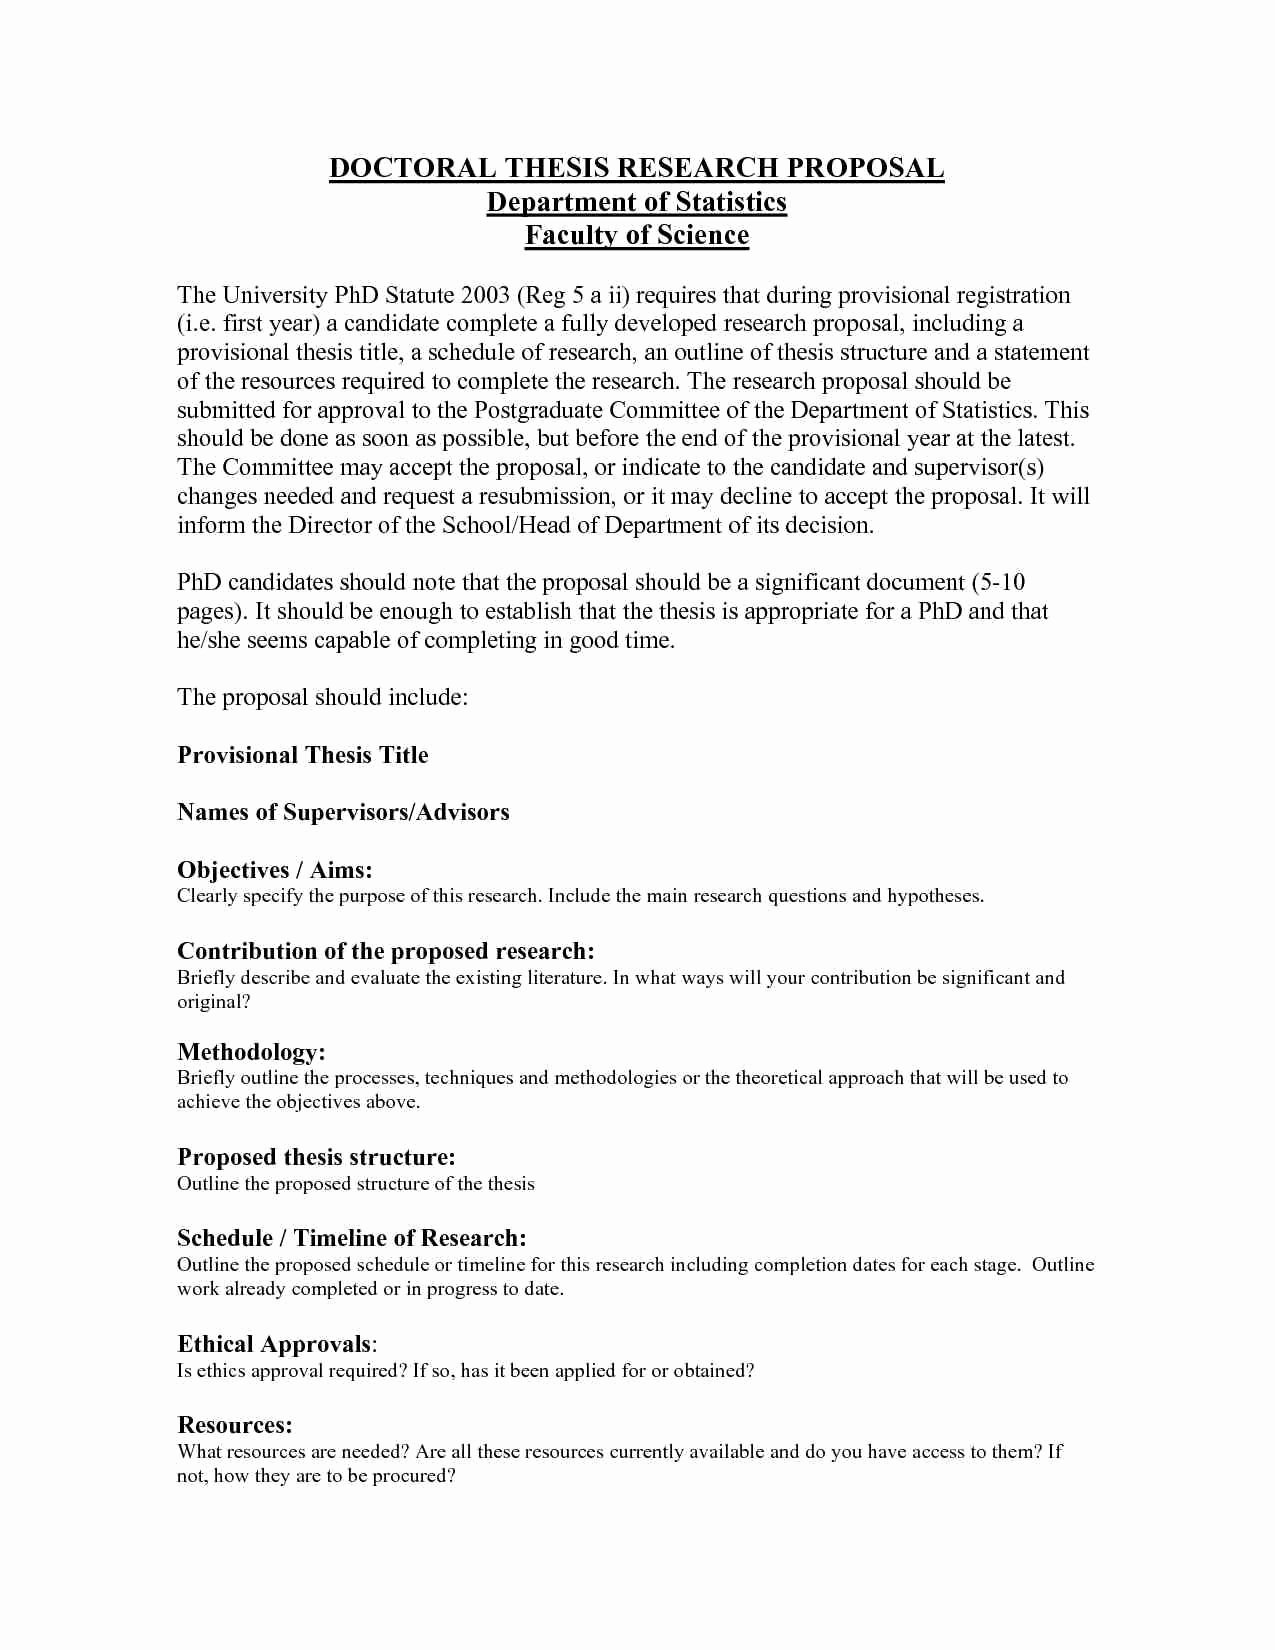 Research Proposal Outline Example Awesome 5 Research Proposal Sample A Cover Letters